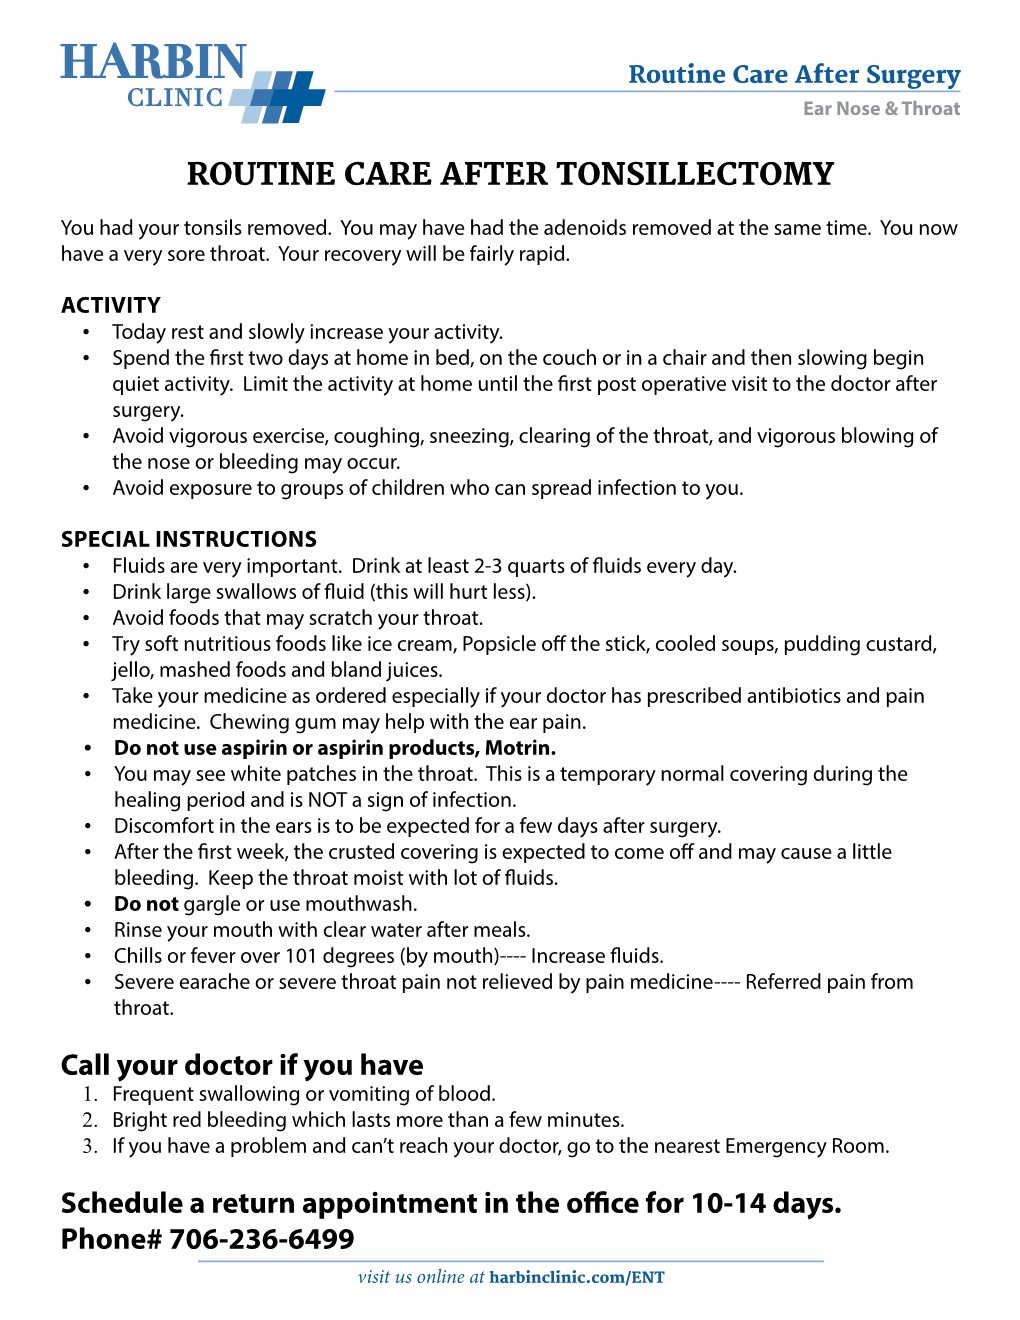 ROUTINE CARE AFTER TONSILLECTOMY Call Your Doctor